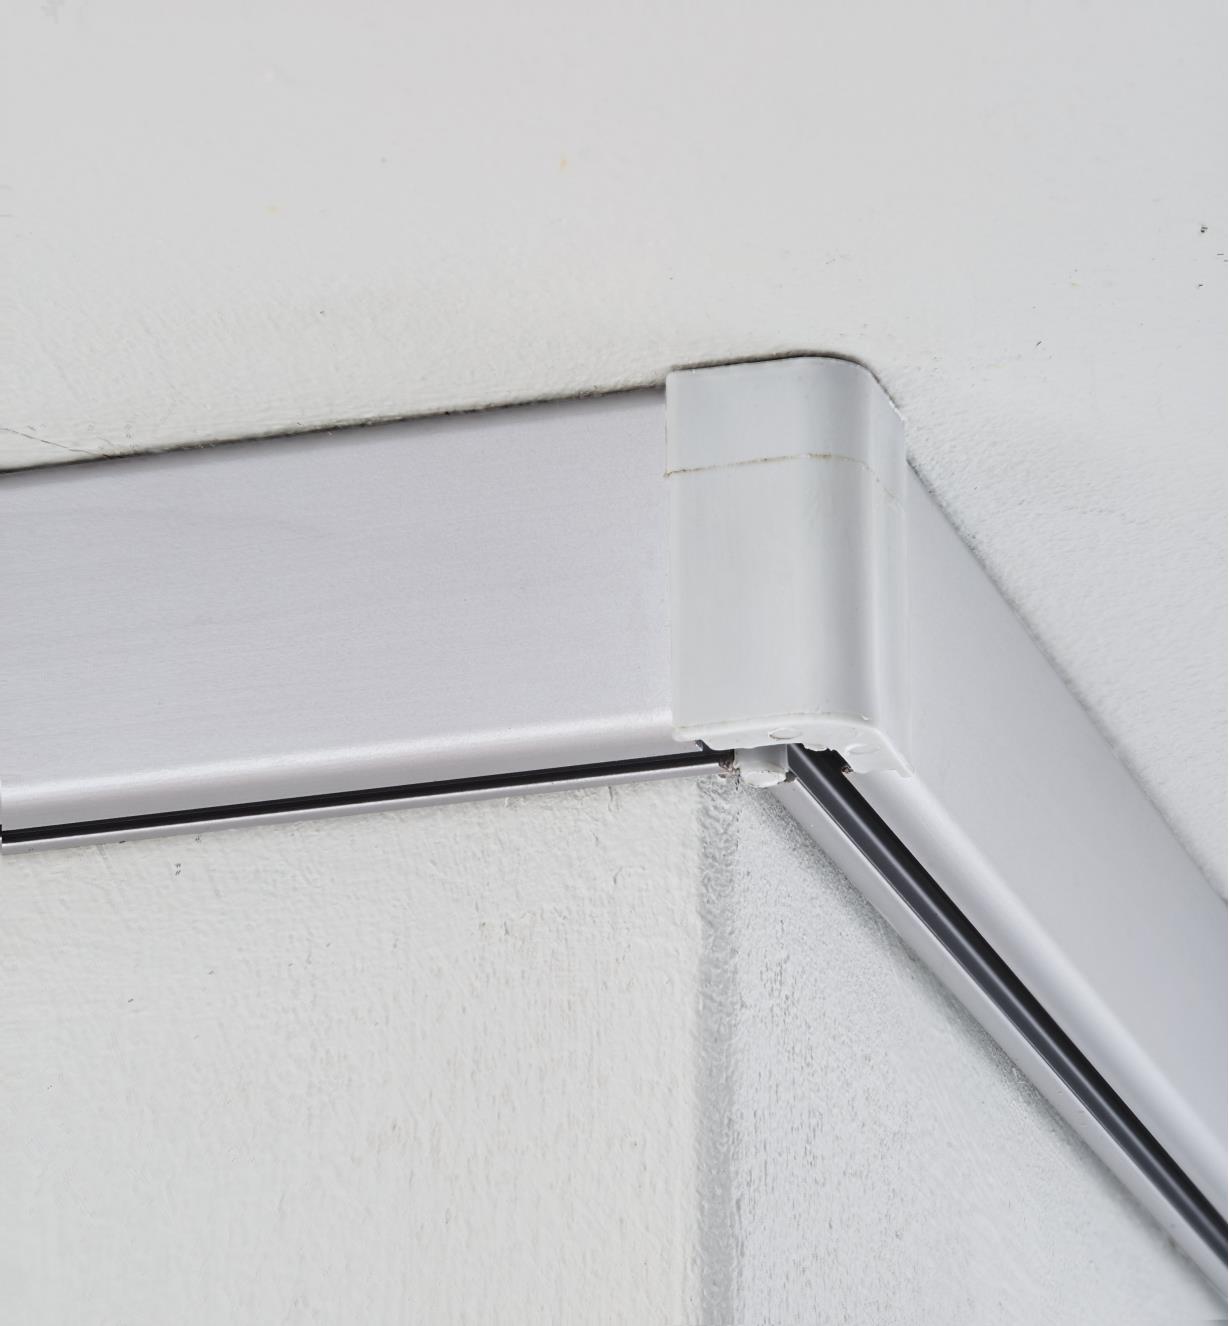 Example of Cliprail rail corner cap joining two support rails at a ceiling corner